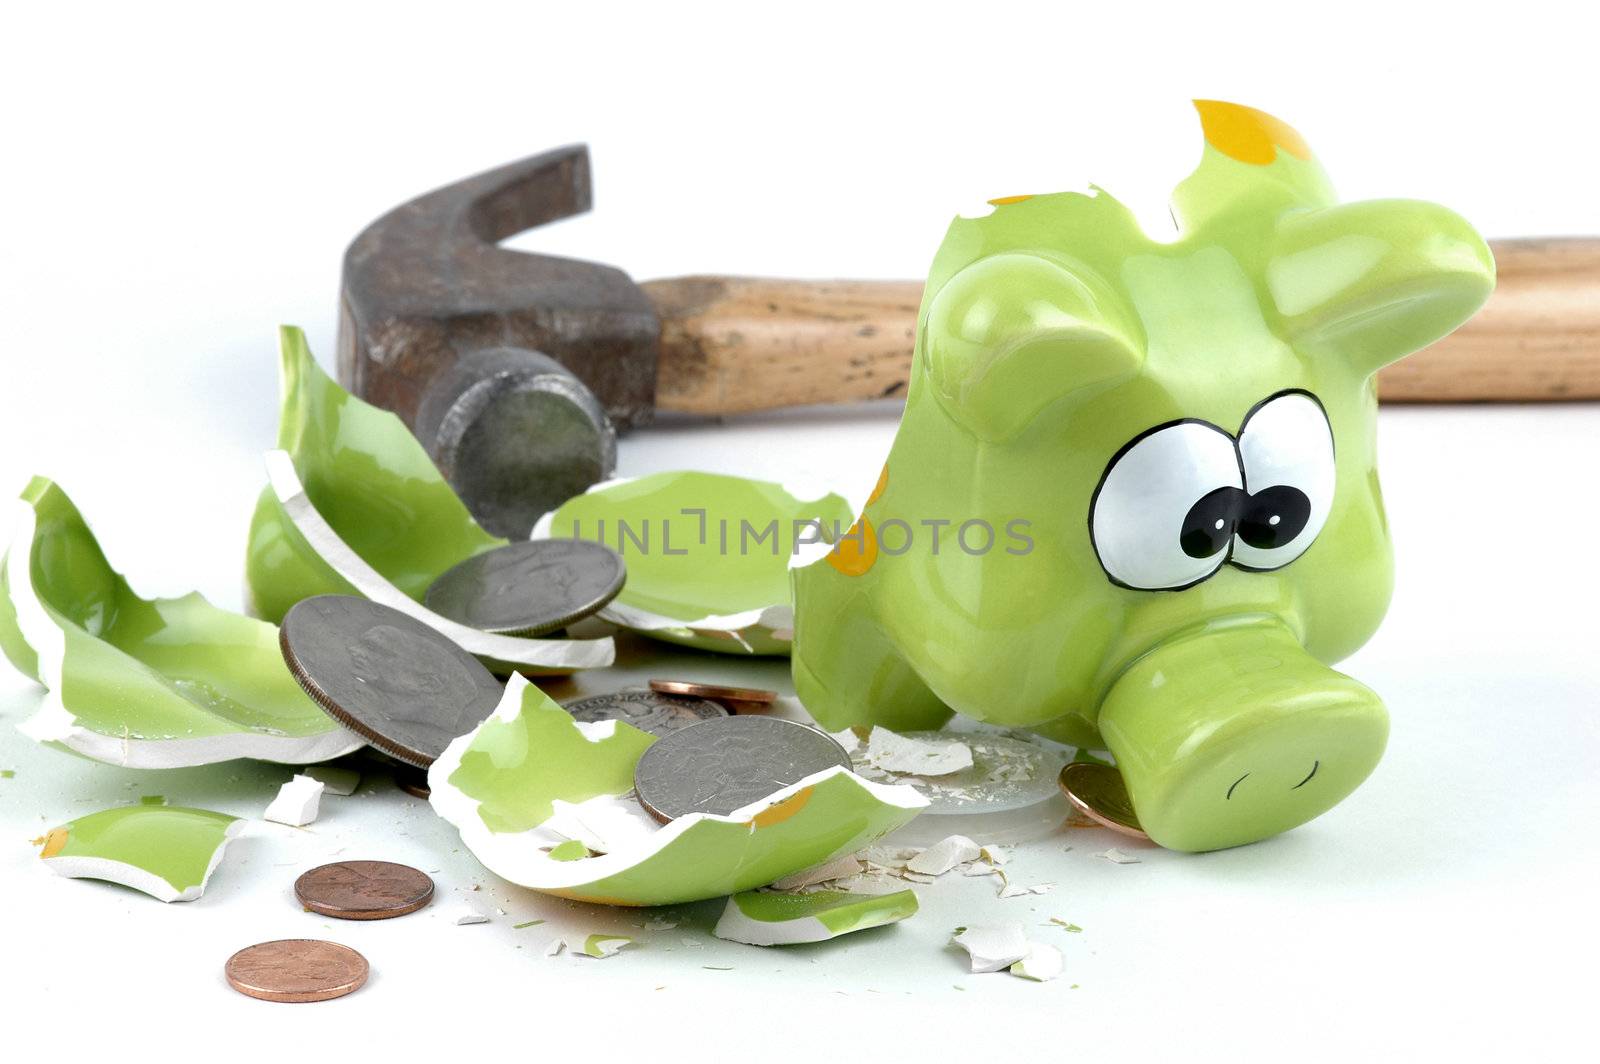 Smashed Piggybank-American by billberryphotography